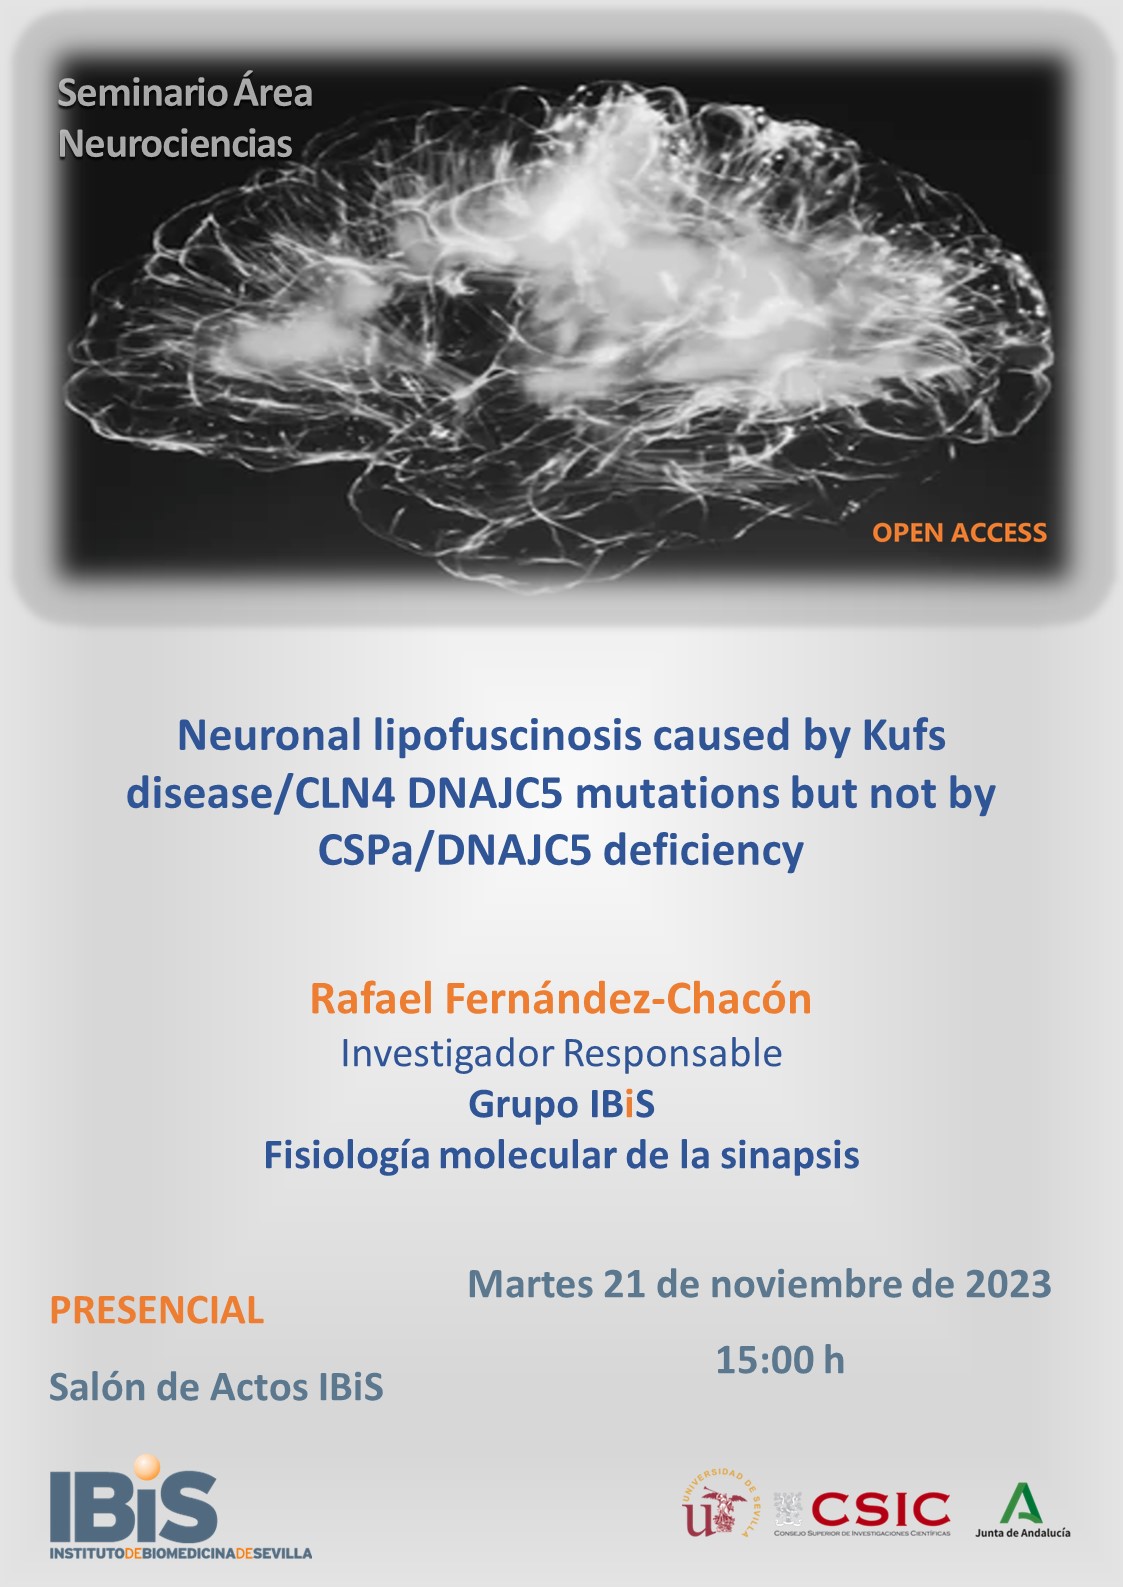 Poster: Neuronal lipofuscinosis caused by Kufs disease/CLN4 DNAJC5 mutations but not by CSPa/DNAJC5 deficiency